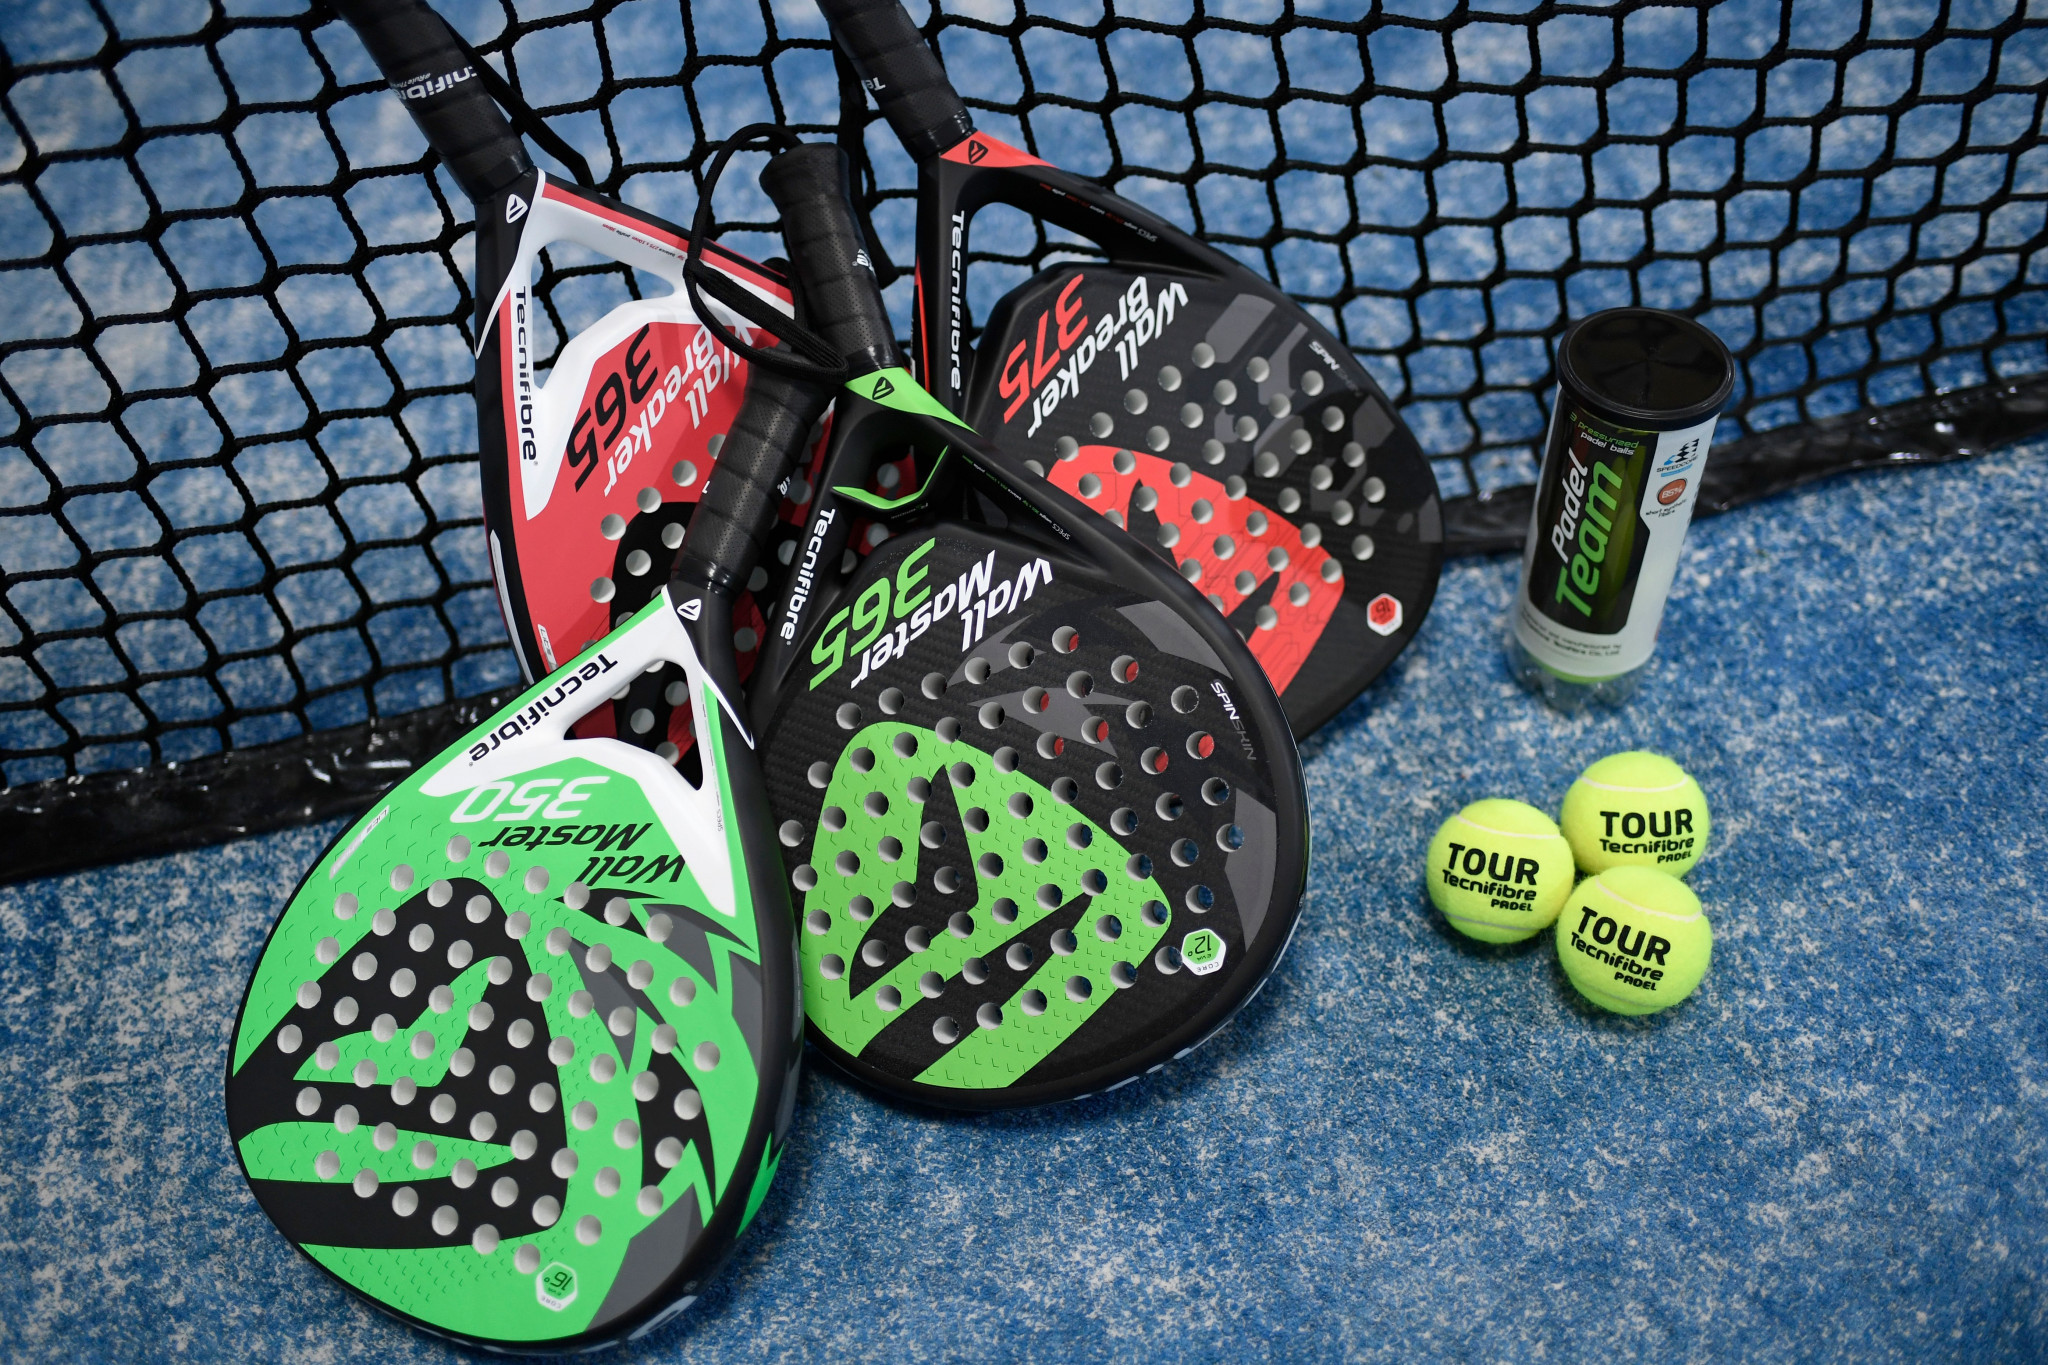 Premier Padel has signed multi-year agreements with the French and Italian Tennis Federations to stage majors in Rome and Paris ©Getty Images 